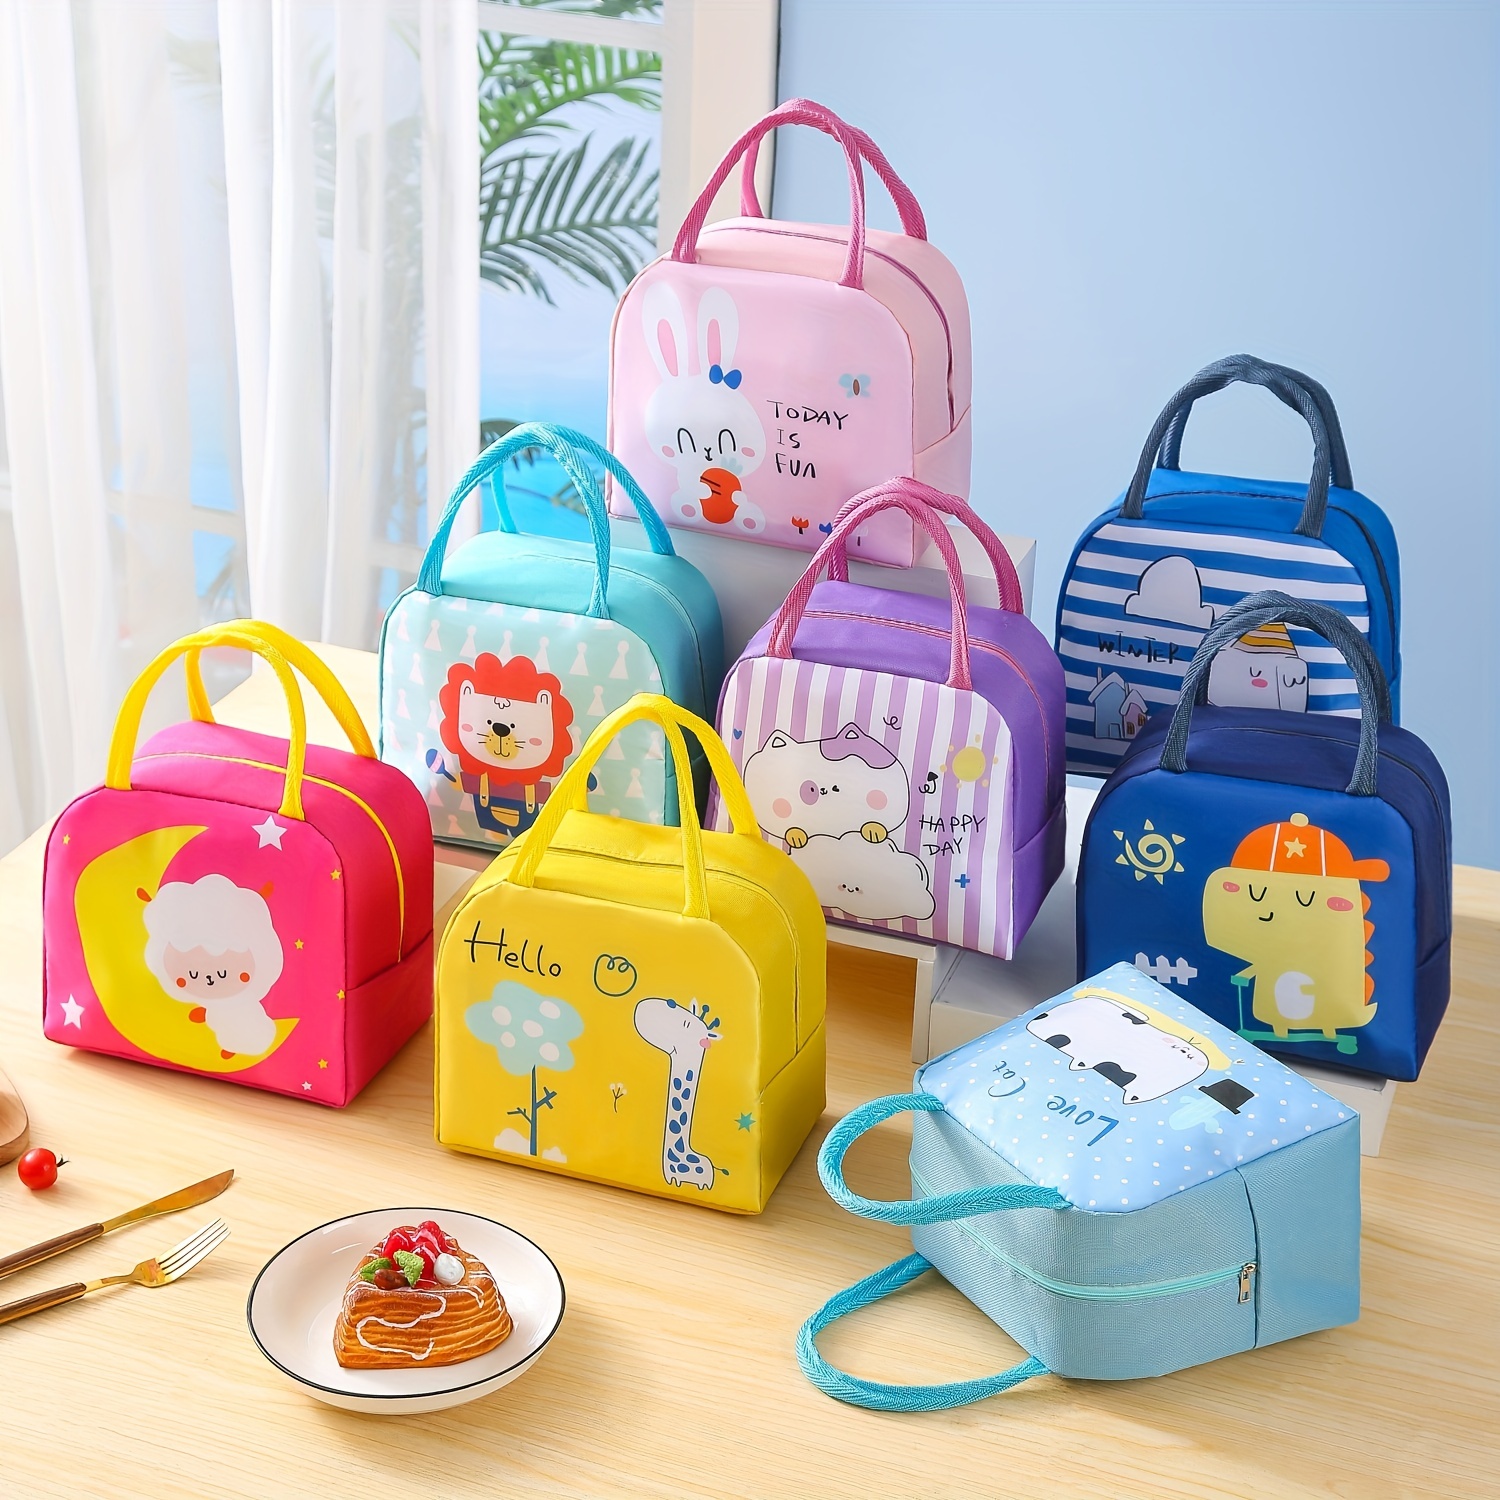 Lovely Insulated Lunch Bag Thermal Lunch Box Bento Bag Food Storage  Containers Cooler Bag loncheras para